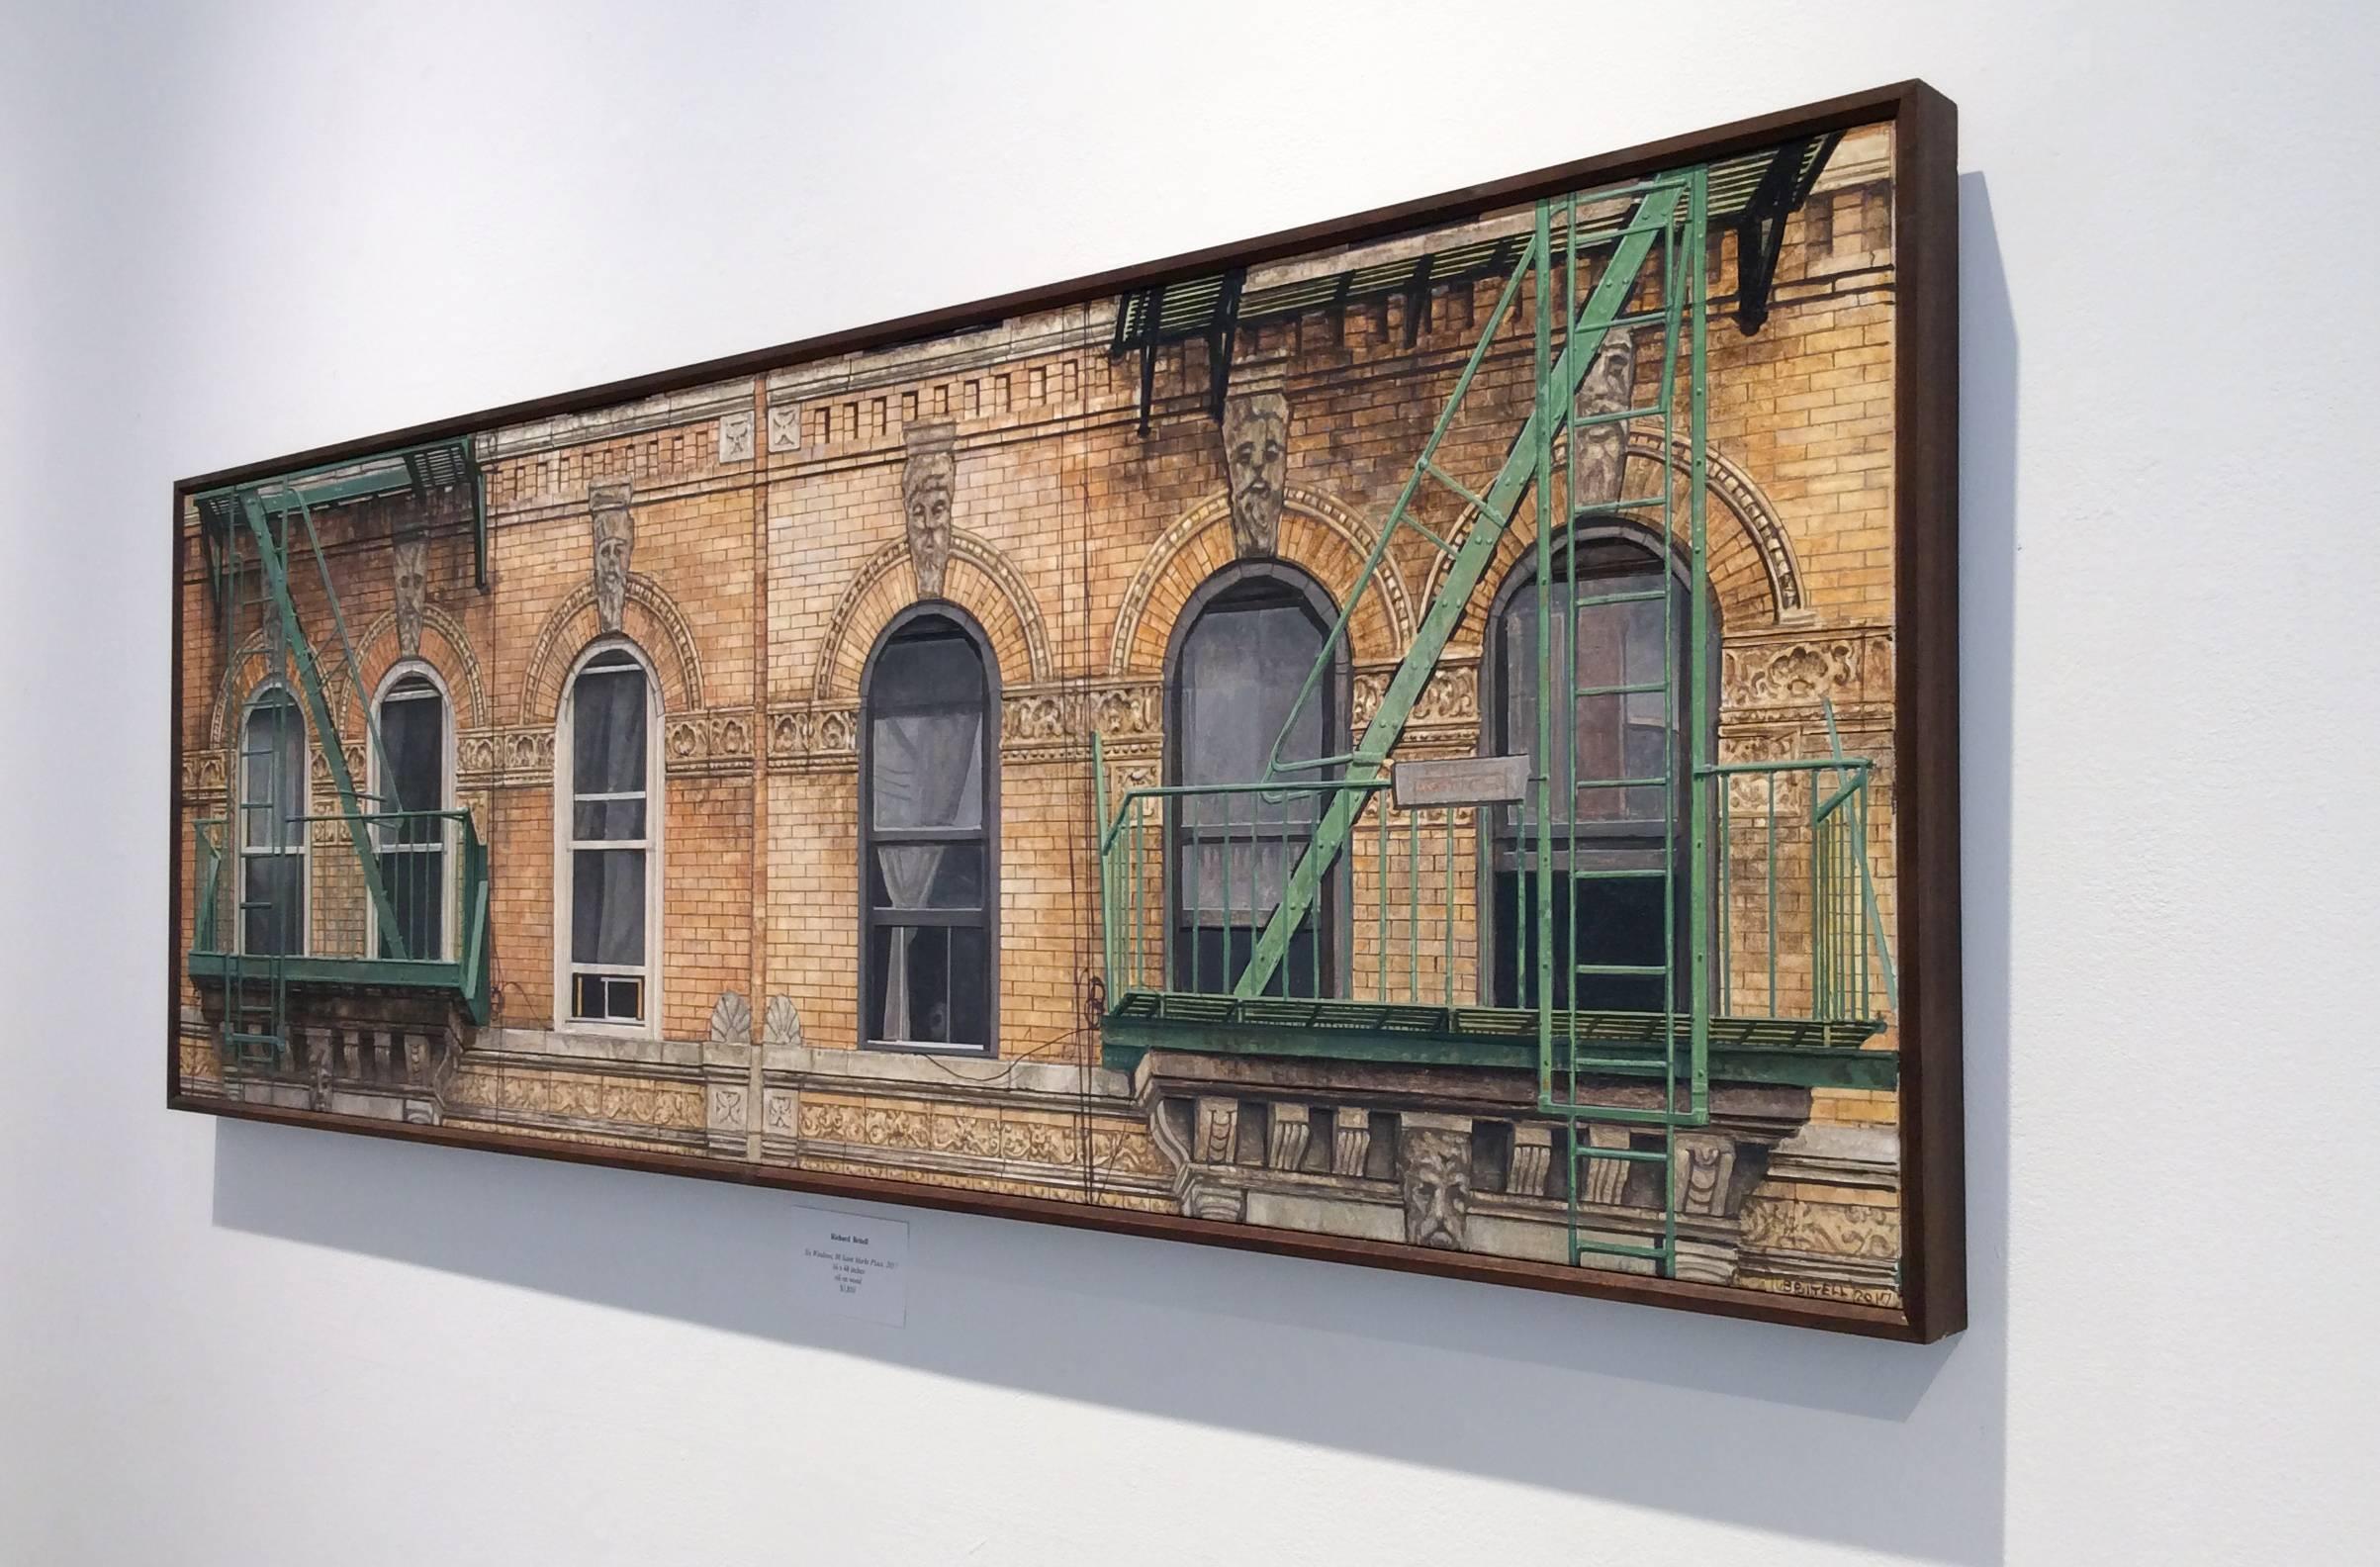 Photo-realist cityscape oil painting of iconic neoclassical red brick building in Manhattan's East Village. 
oil on wood in artist made frame
16 x 48 inches 

This contemporary, realistic oil painting of a New York City building was painted by